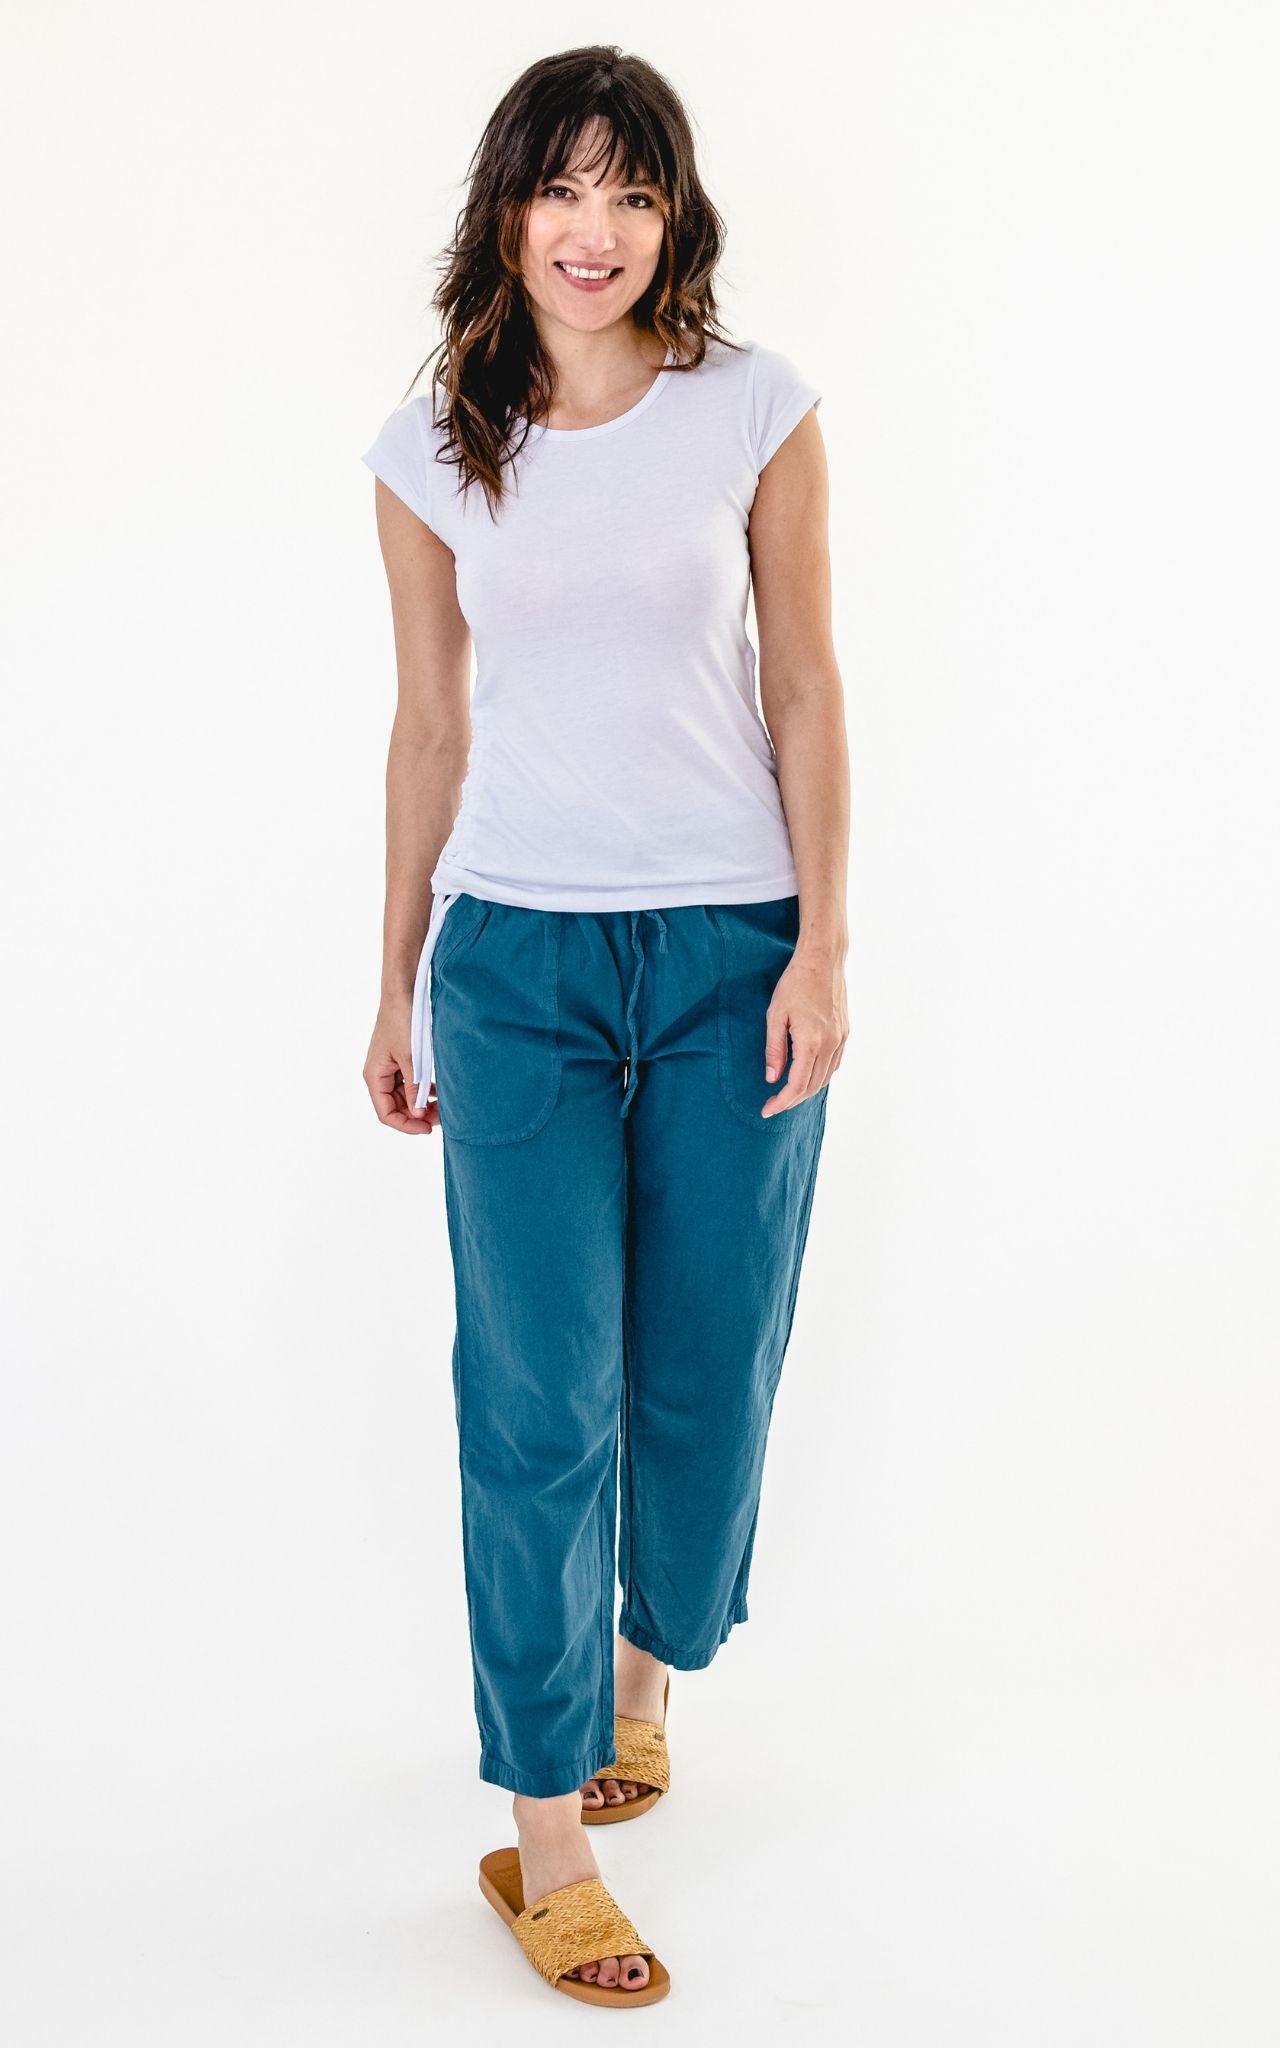 Surya Australia Ethical Cotton Loose Pants from Nepal - Turquoise